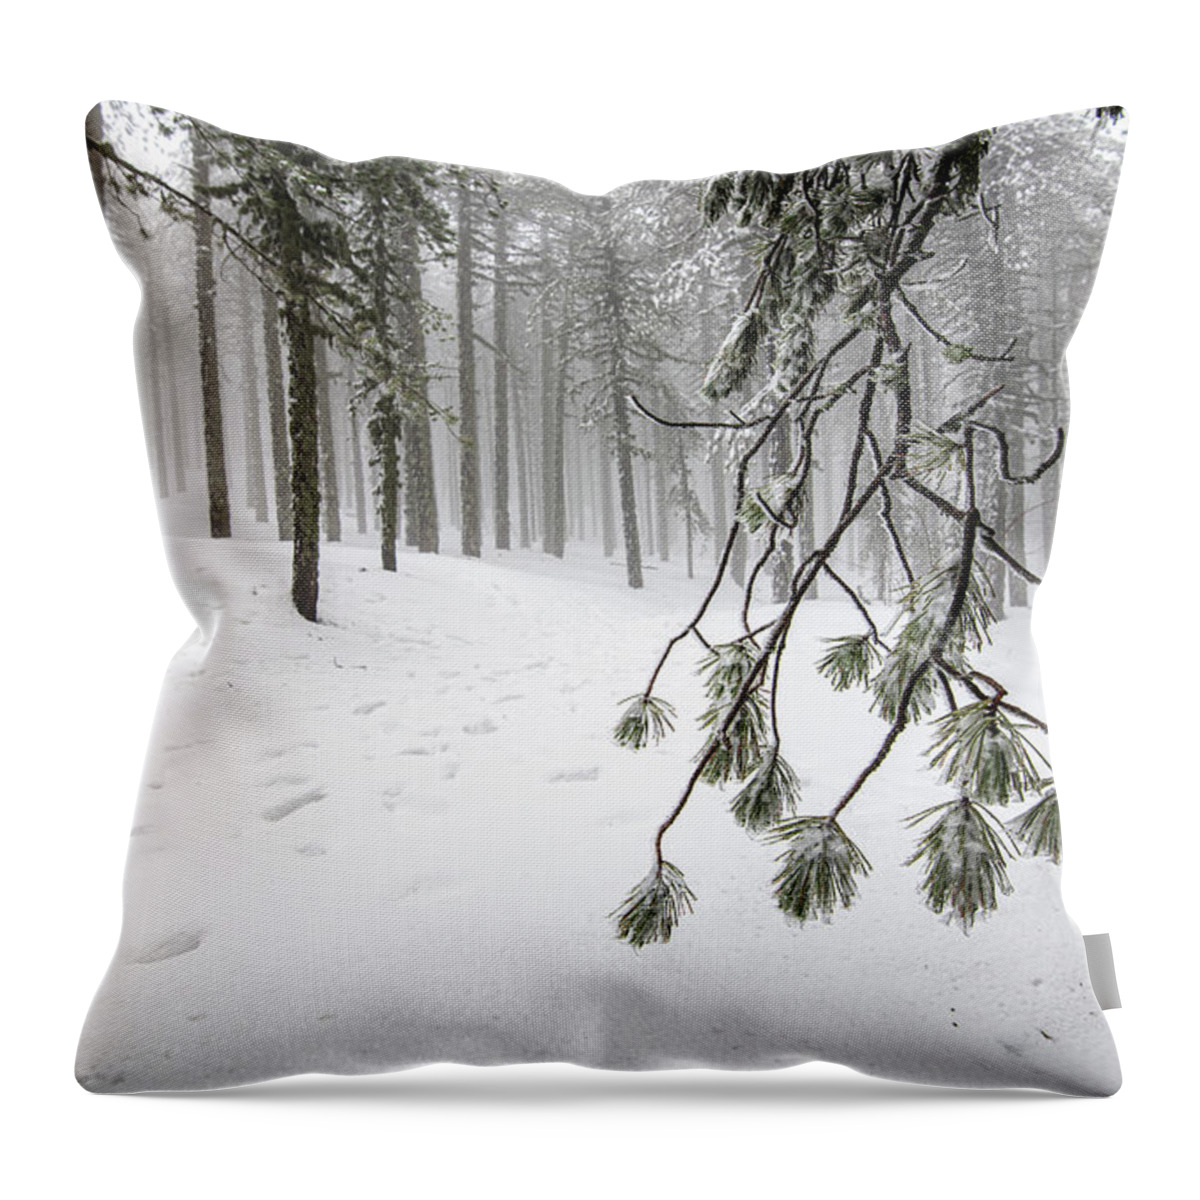 Winter Landscape Throw Pillow featuring the photograph Winter forest landscape with mountain covered in snow by Michalakis Ppalis